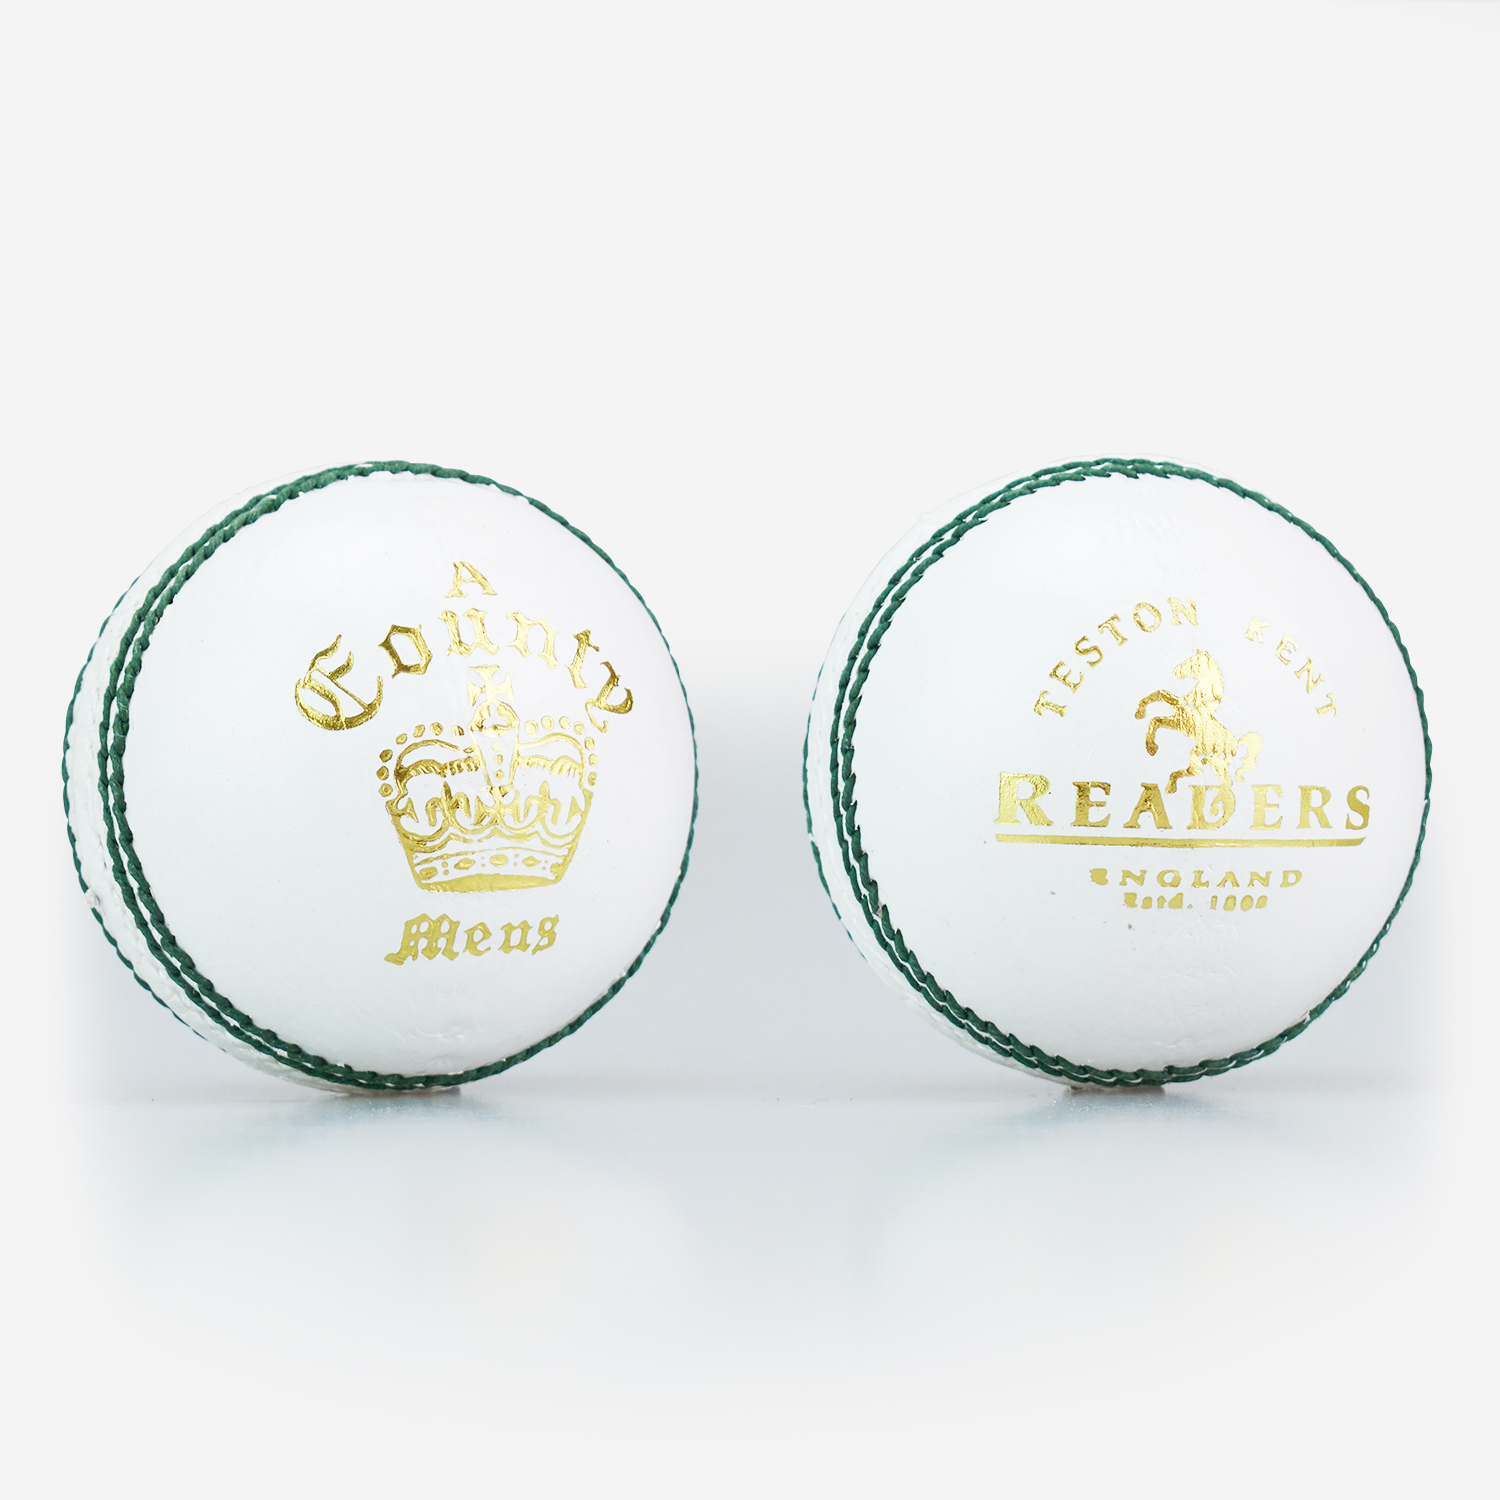 Readers County Crown White Cricket Ball